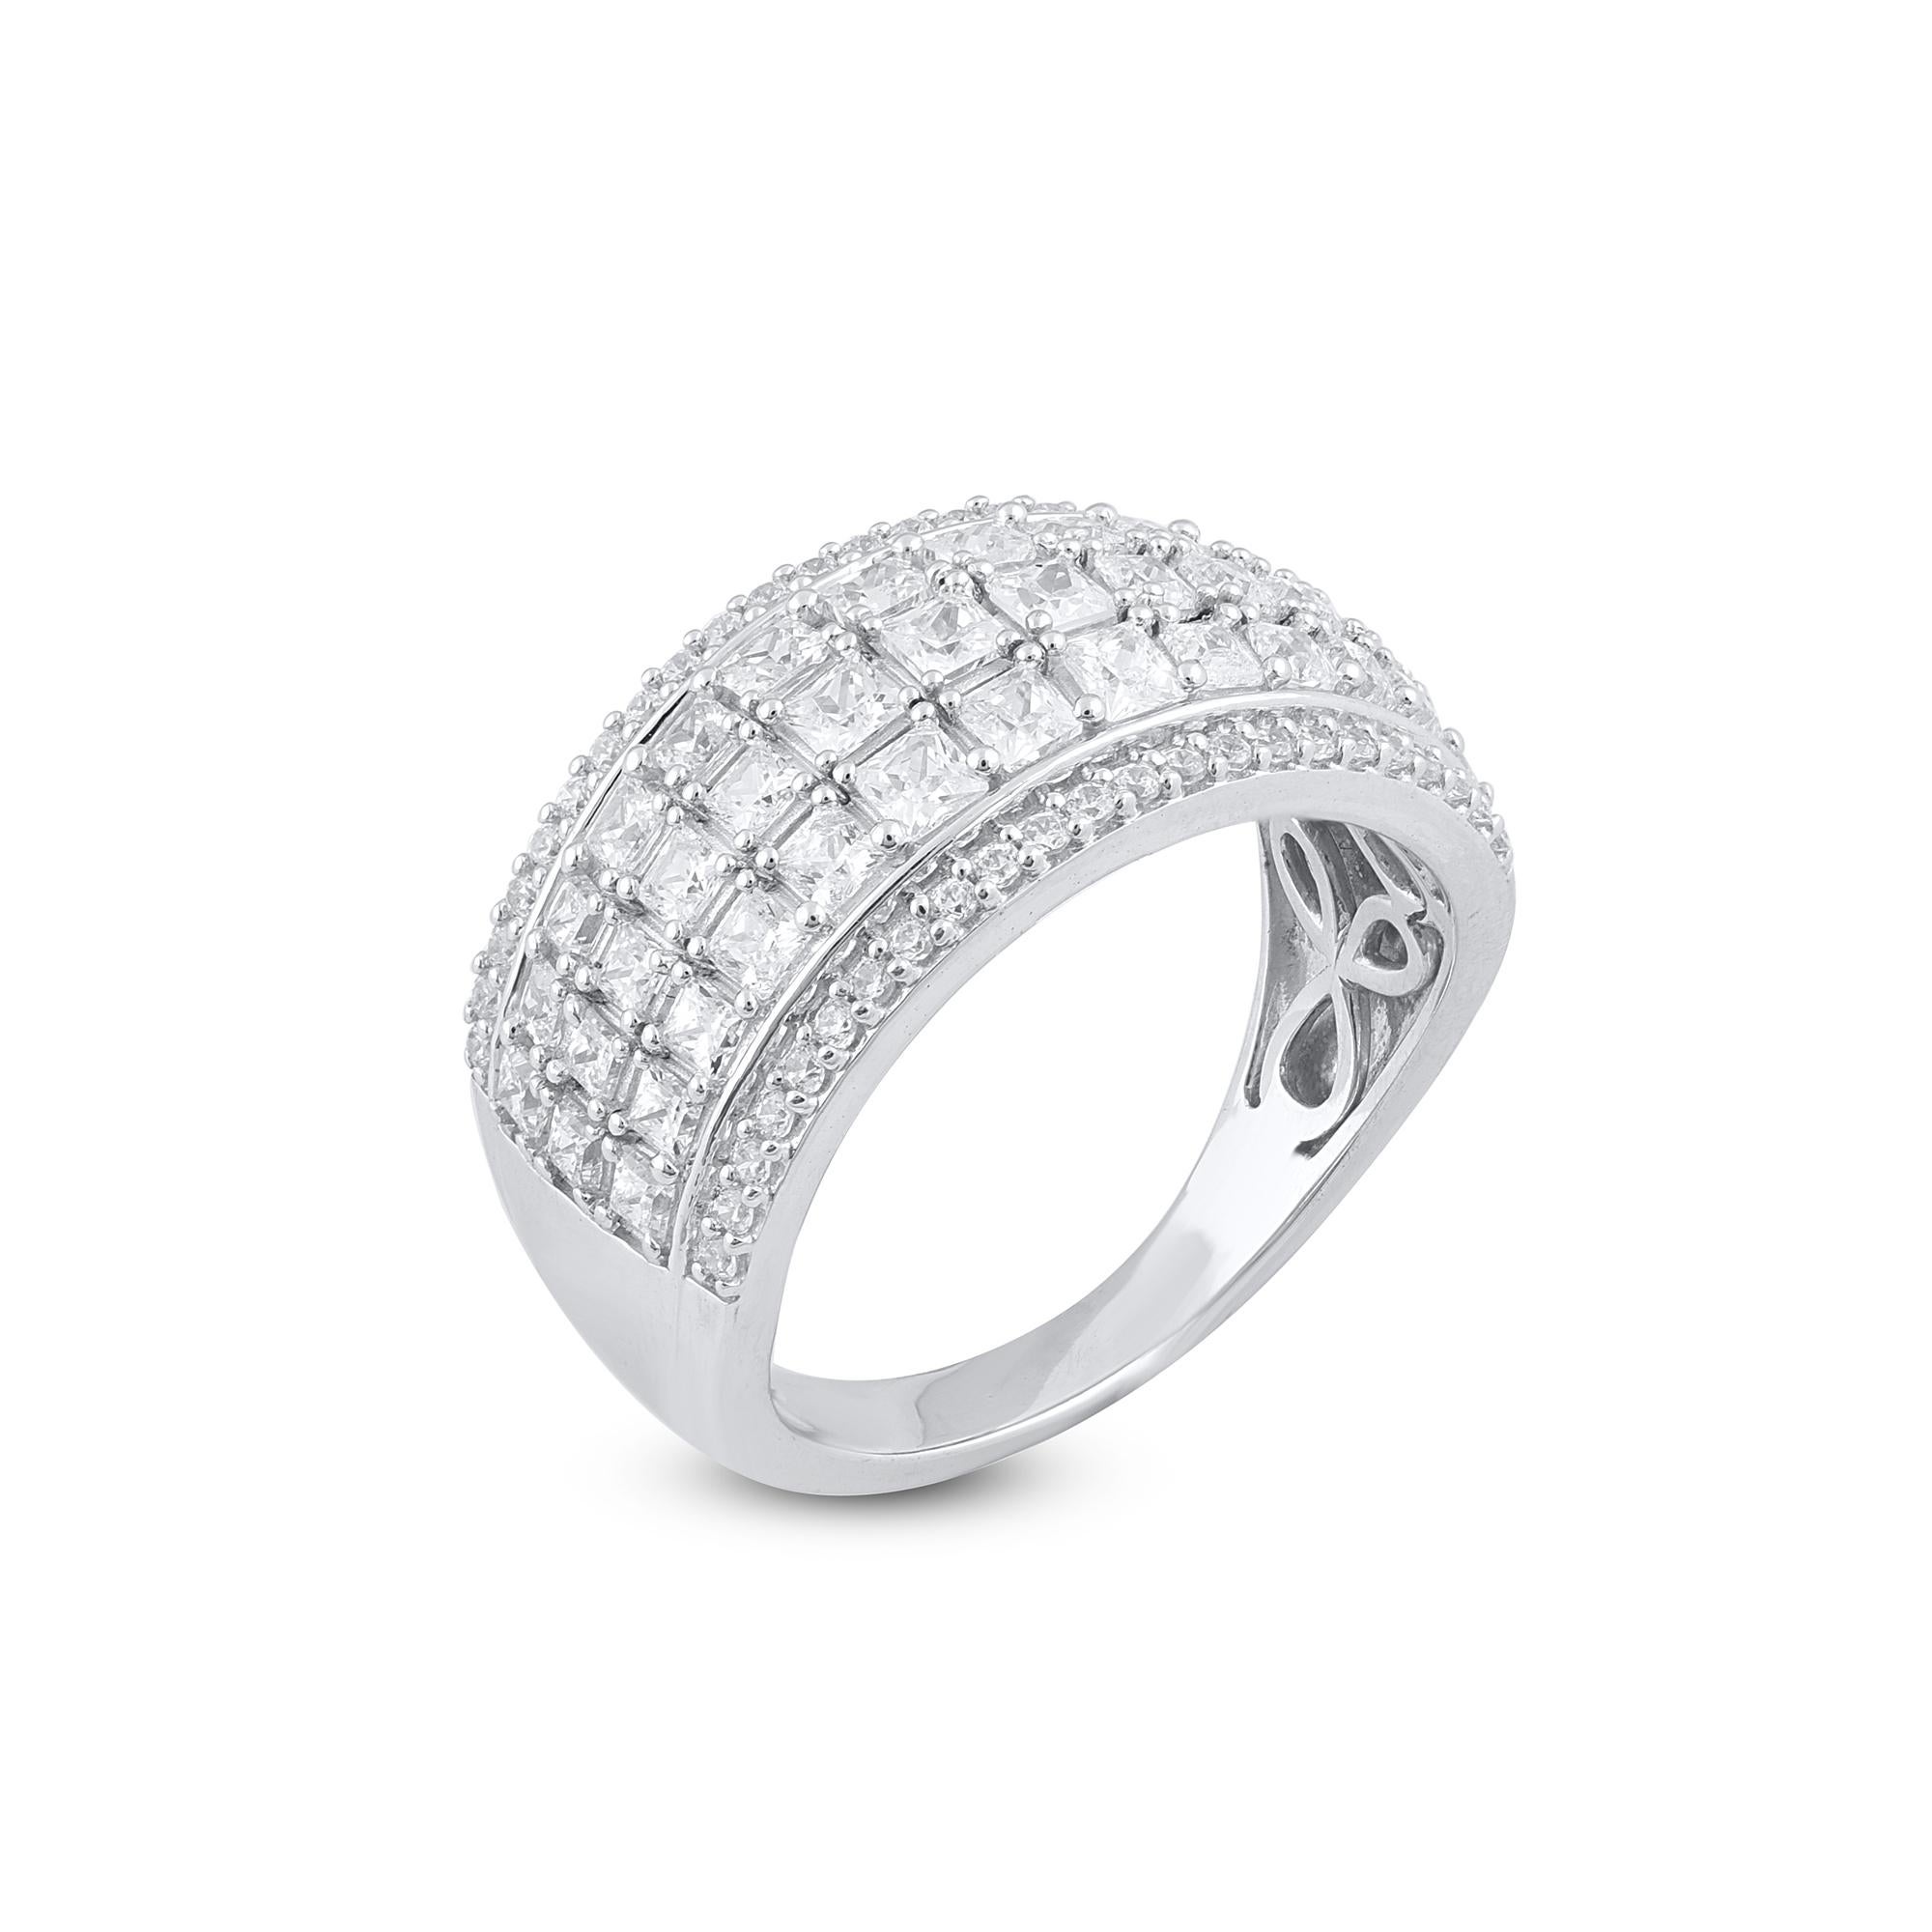 Experience dazzling diamonds with this magnificent studded ring that’s sure to steal all the attention. The ring is crafted from 14-karat gold in your choice of white, rose, or yellow, and features Round Brilliant 46  Princess - 39 white diamonds,